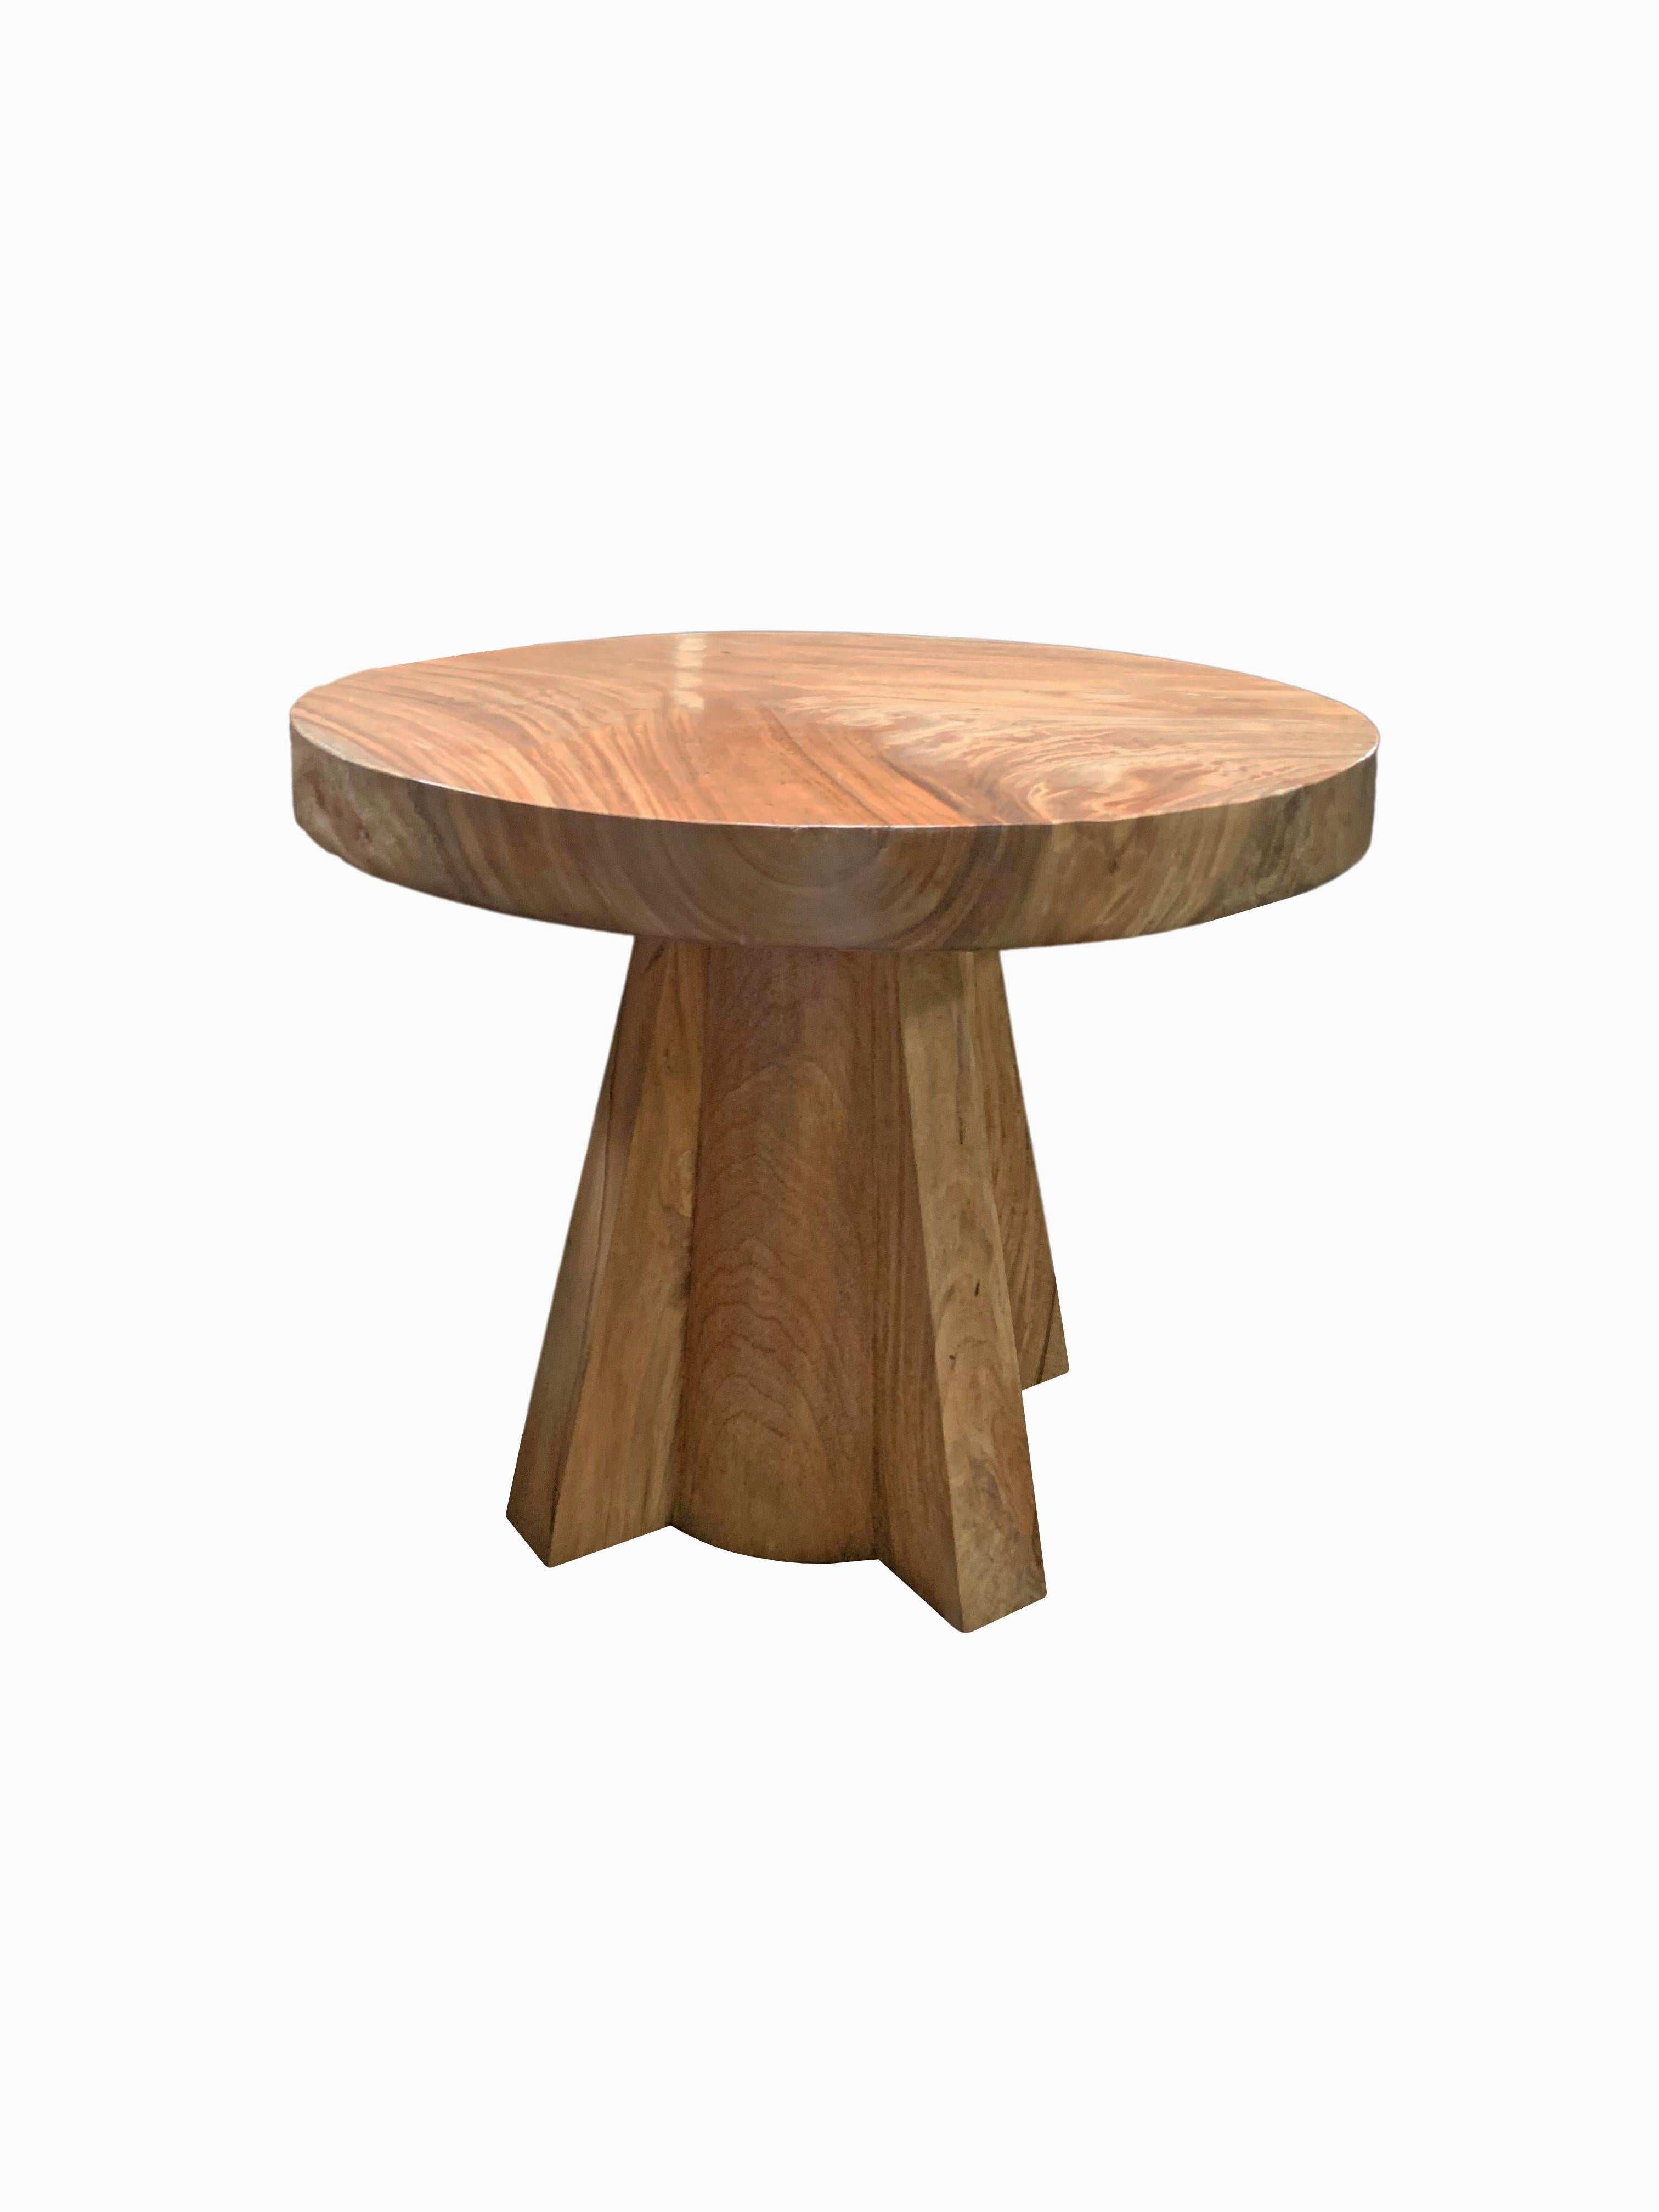 A wonderfully sculptural round side table. Crafted from solid suar wood with wood textures and shades throughout. The table top was crafted from a single block of wood supported by angular legs. An organic object to bring warmth to any space.